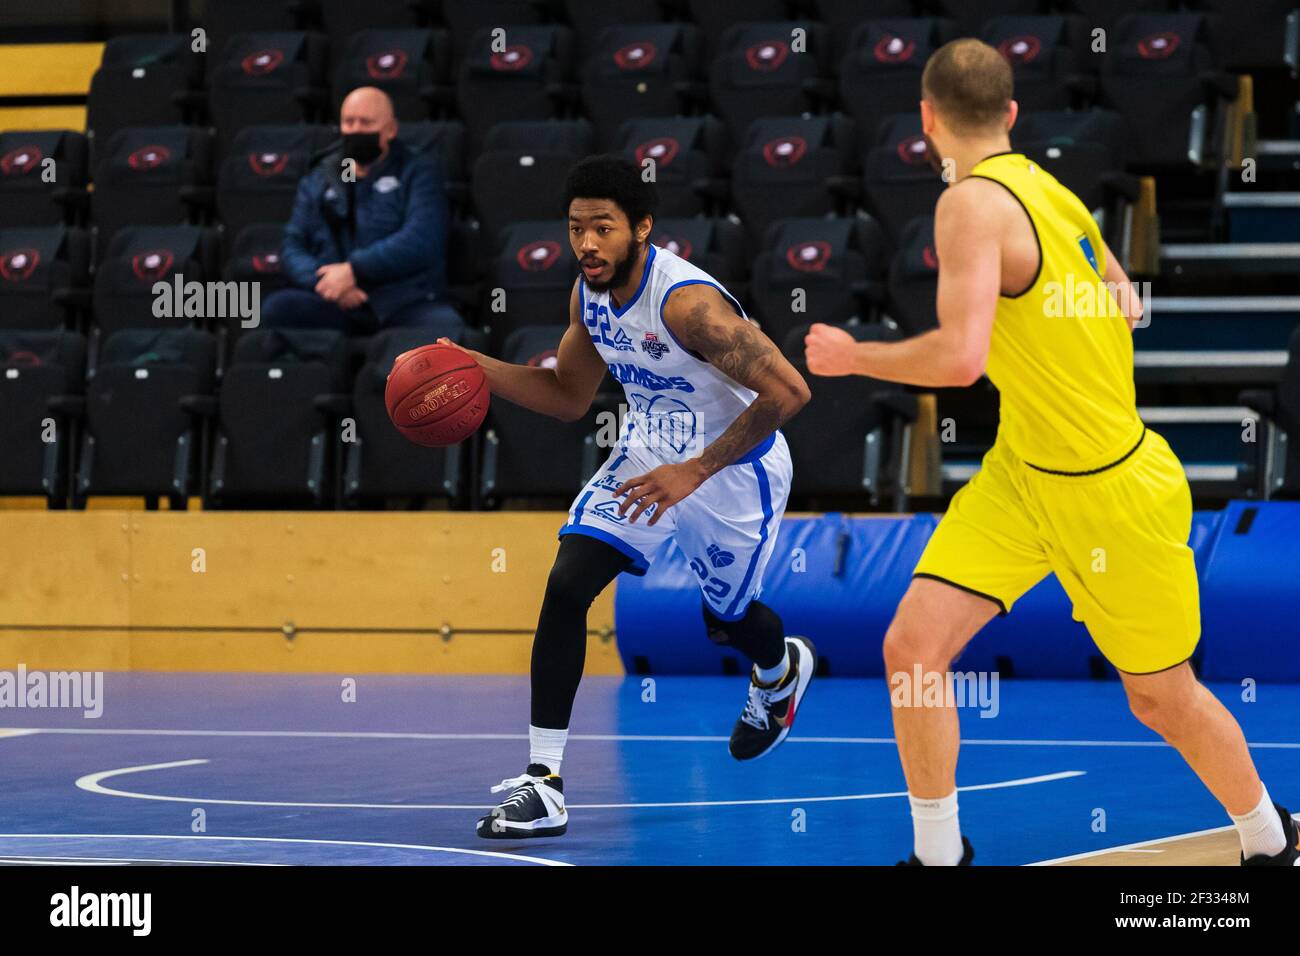 ZWOLLE, NETHERLANDS - MARCH 14: Johnathan Dunn of Landstede Hammers Zwolle  during the Dutch Basketball League match between Landstede Hammers and Den  Stock Photo - Alamy